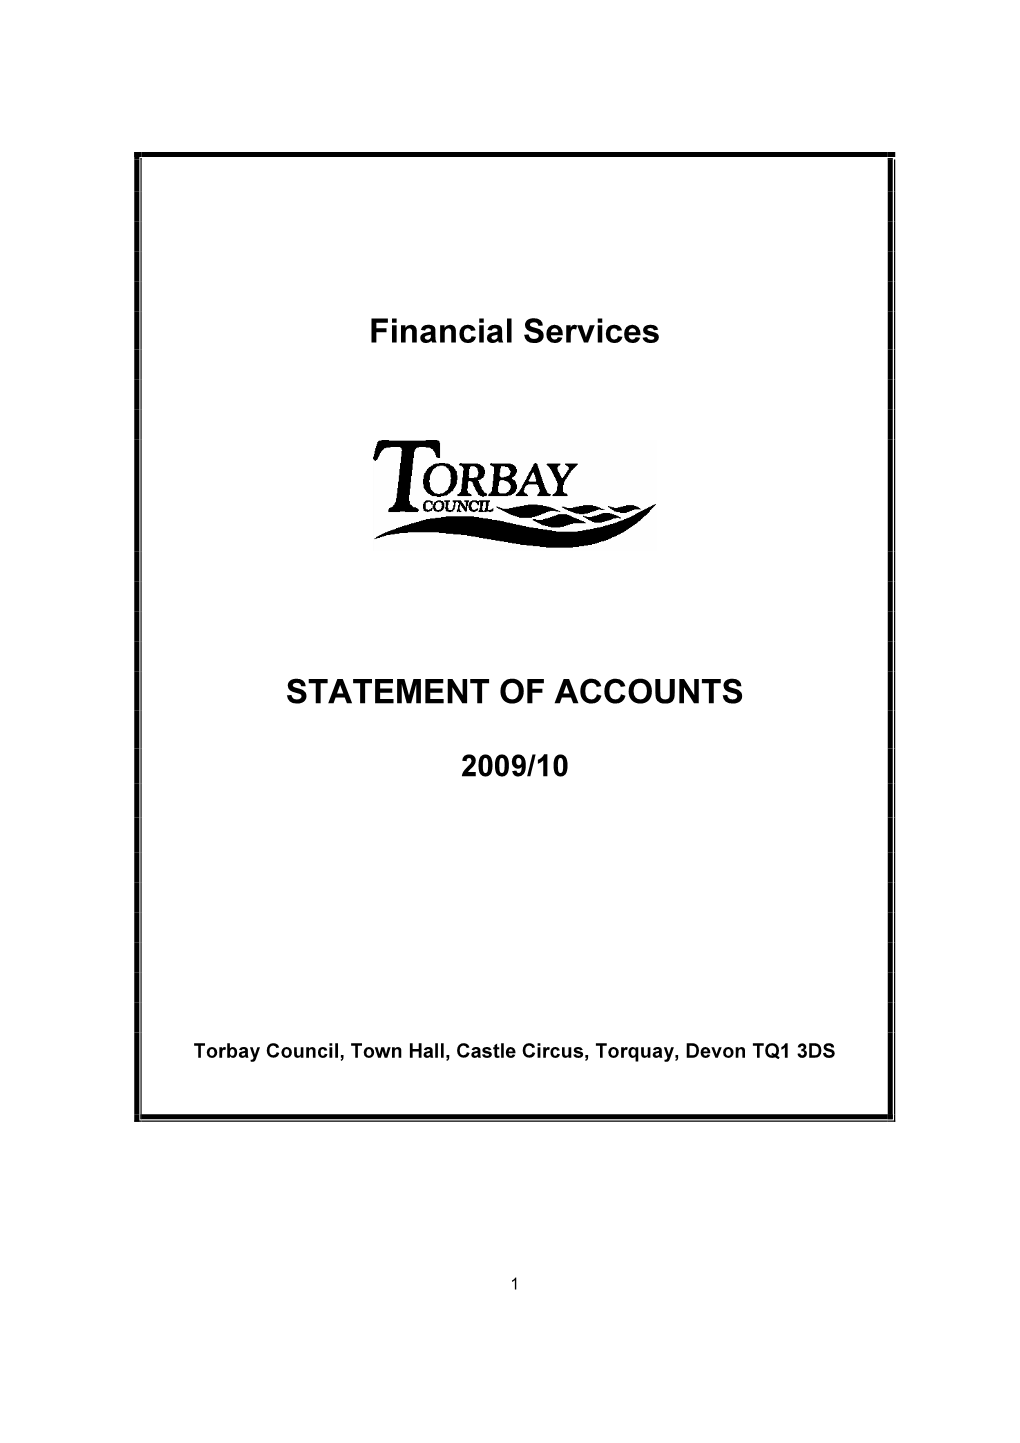 Financial Services STATEMENT of ACCOUNTS